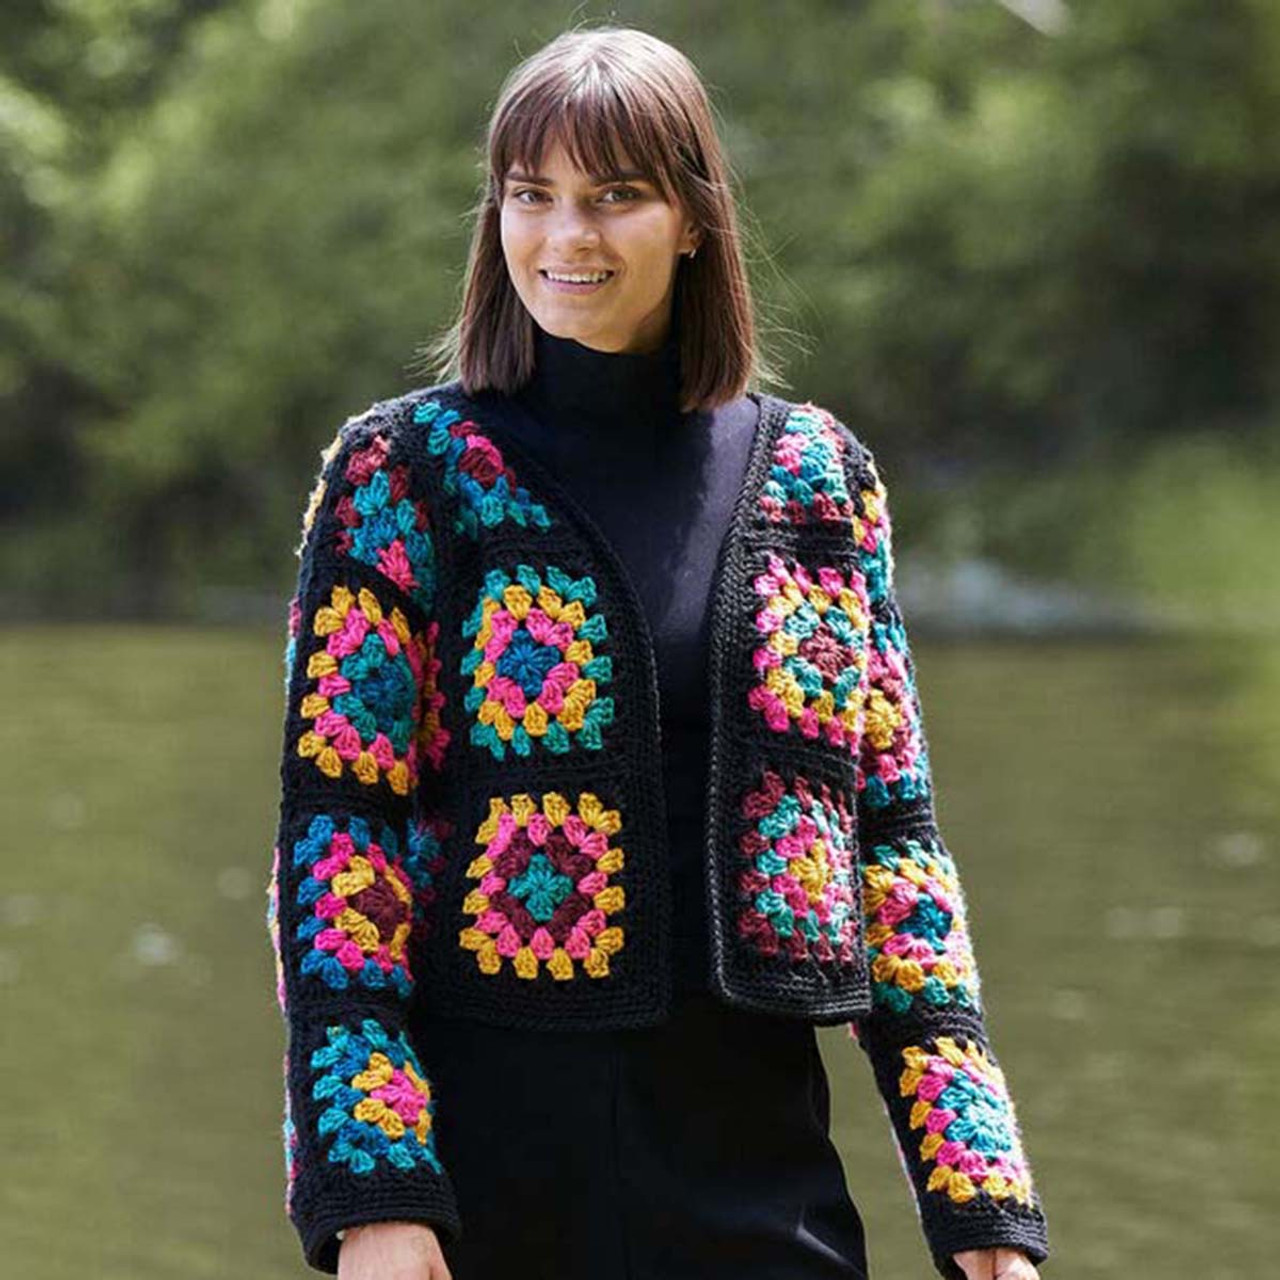 Red Heart Granny Square Jacket Pattern Free Download